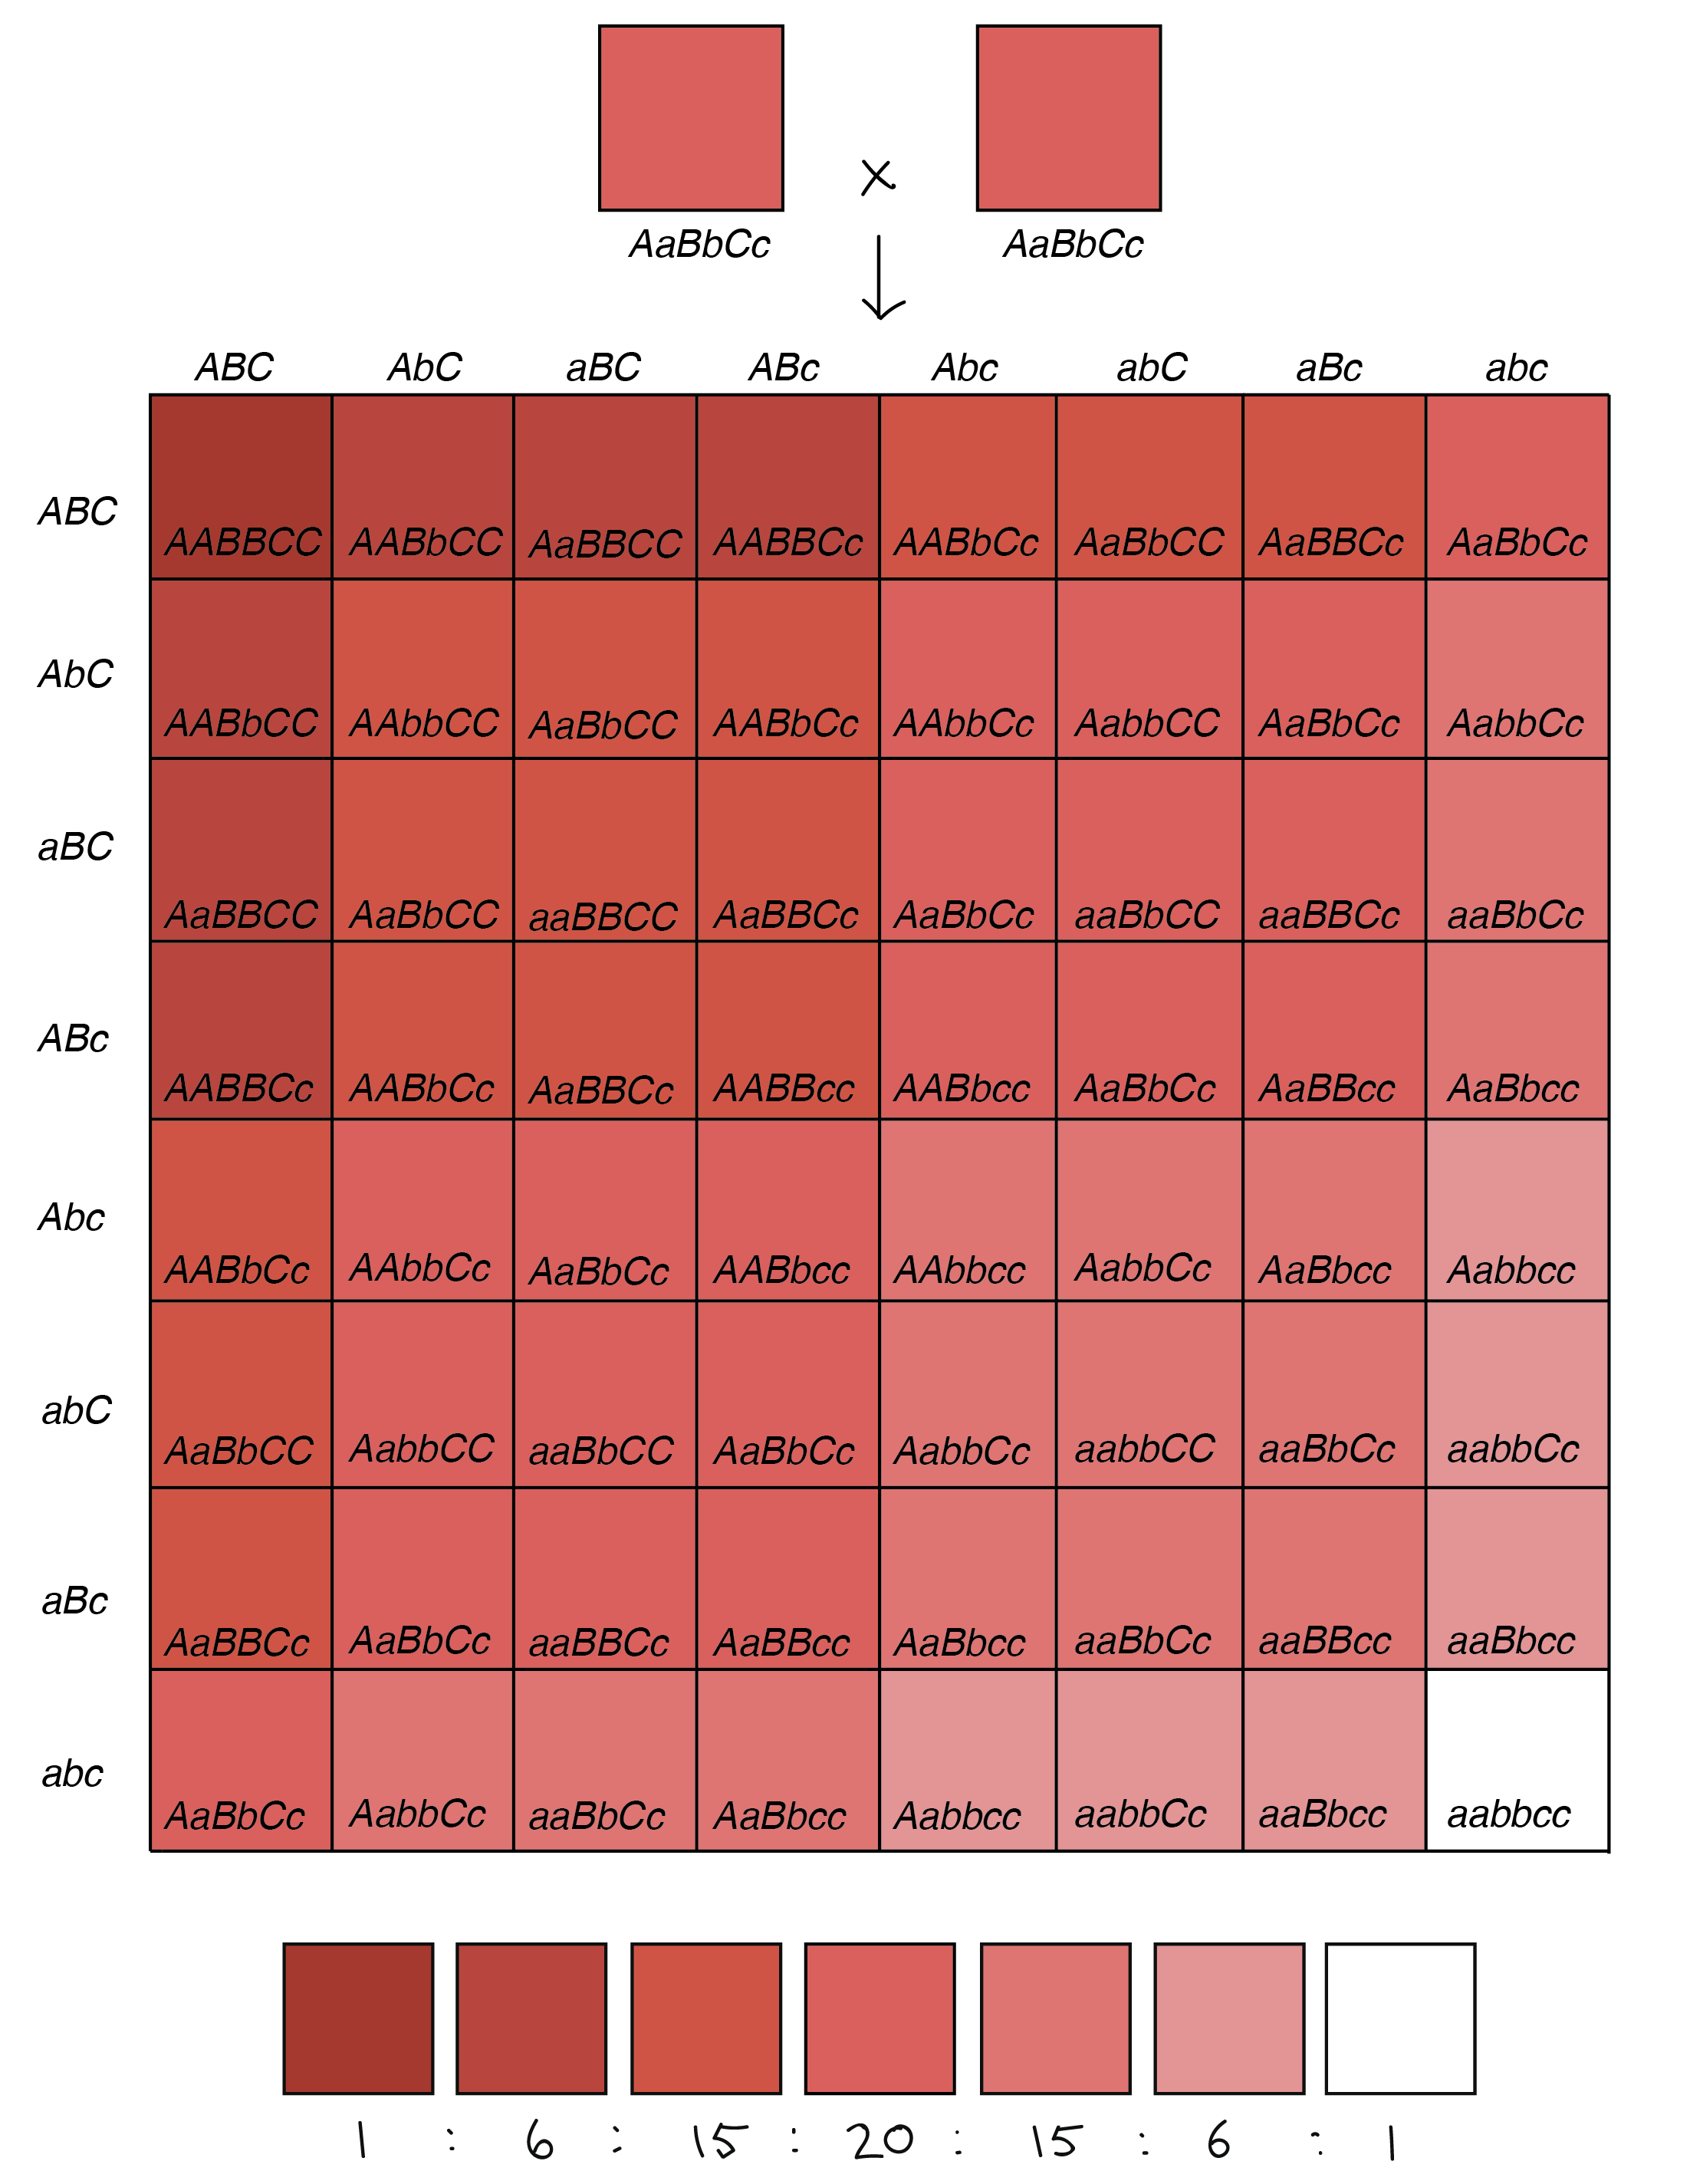 64-square Punnett square illustrating the phenotypes of the offspring of an _AaBbCc_ x _AaBbCc_ cross (in which each uppercase allele contributes one unit of pigment, while each lowercase allele contributes zero units of pigment). Of the 64 squares in the chart: 1 square produces a very very dark red phenotype (six units of pigment). 6 squares produce a very dark red phenotype (five units of pigment). 15 squares produce a dark red phenotype (four units of pigment). 20 squares produce a red phenotype (three units of pigment). 15 squares produce a light red phenotype (two units of pigment). 6 squares produce a very light red phenotype (one unit of pigment). 1 square produces a white phenotype (no units of pigment).